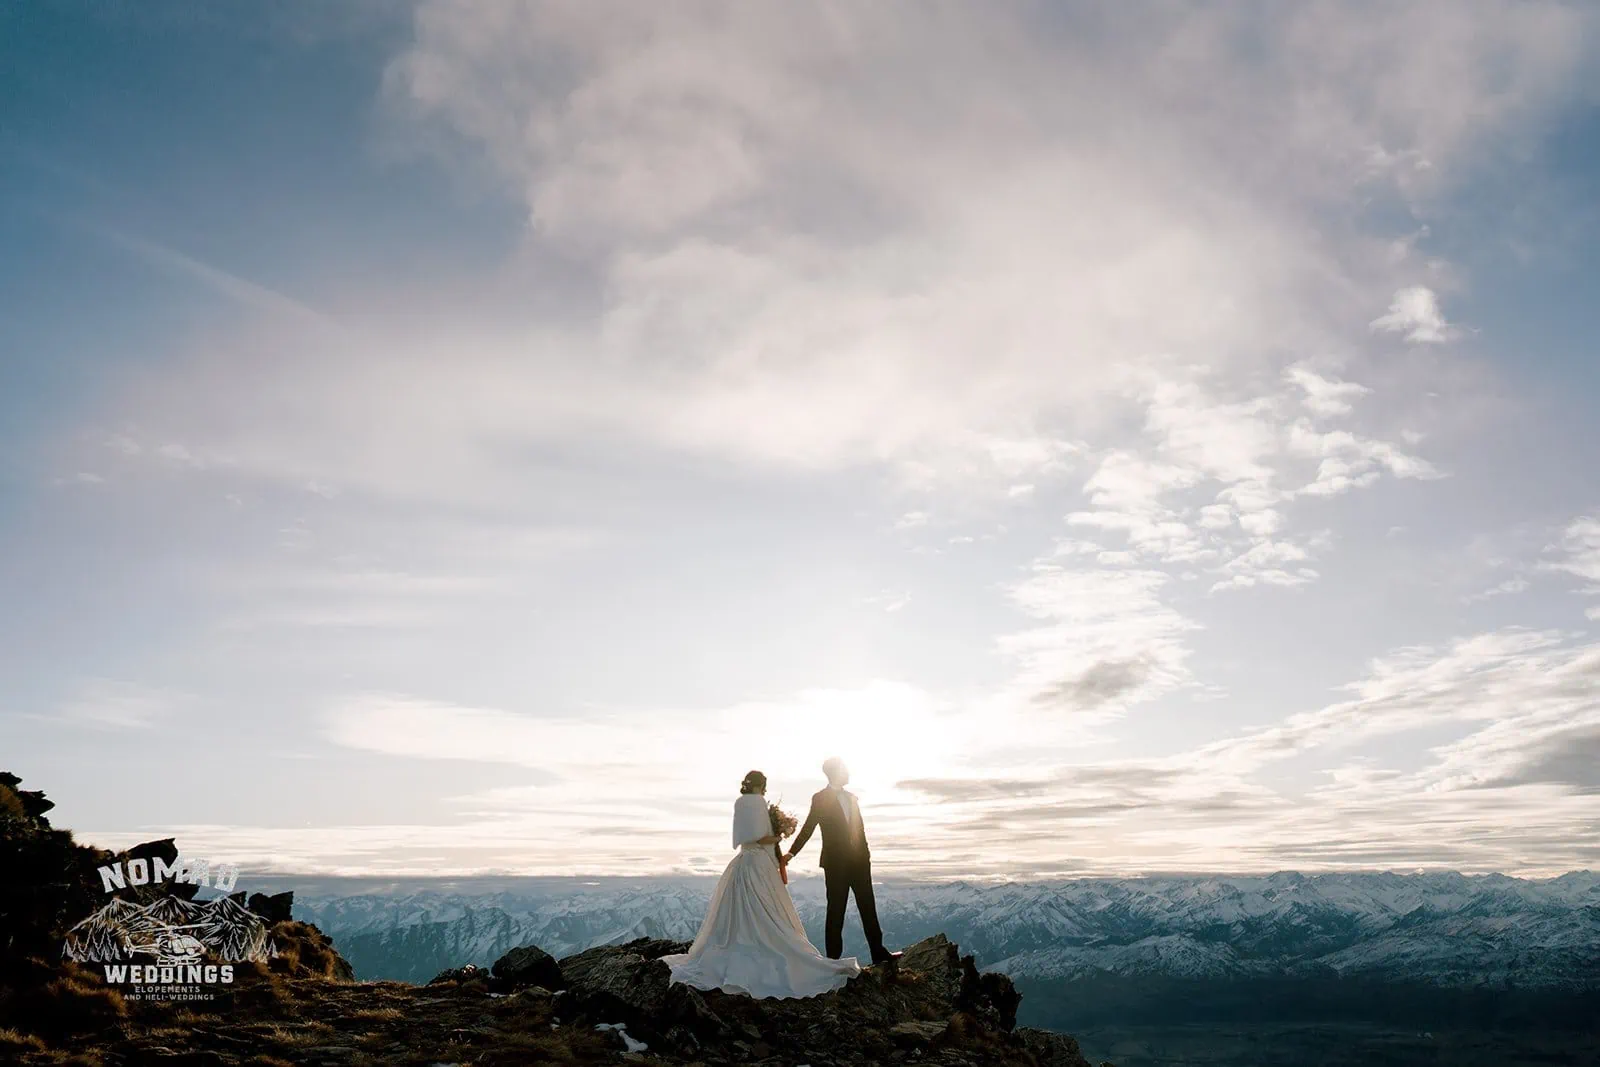 Queenstown New Zealand Elopement Wedding Photographer - A bride and groom, Bo and Junyi, have a heli pre-wedding shoot on a mountain with four landings at sunset.